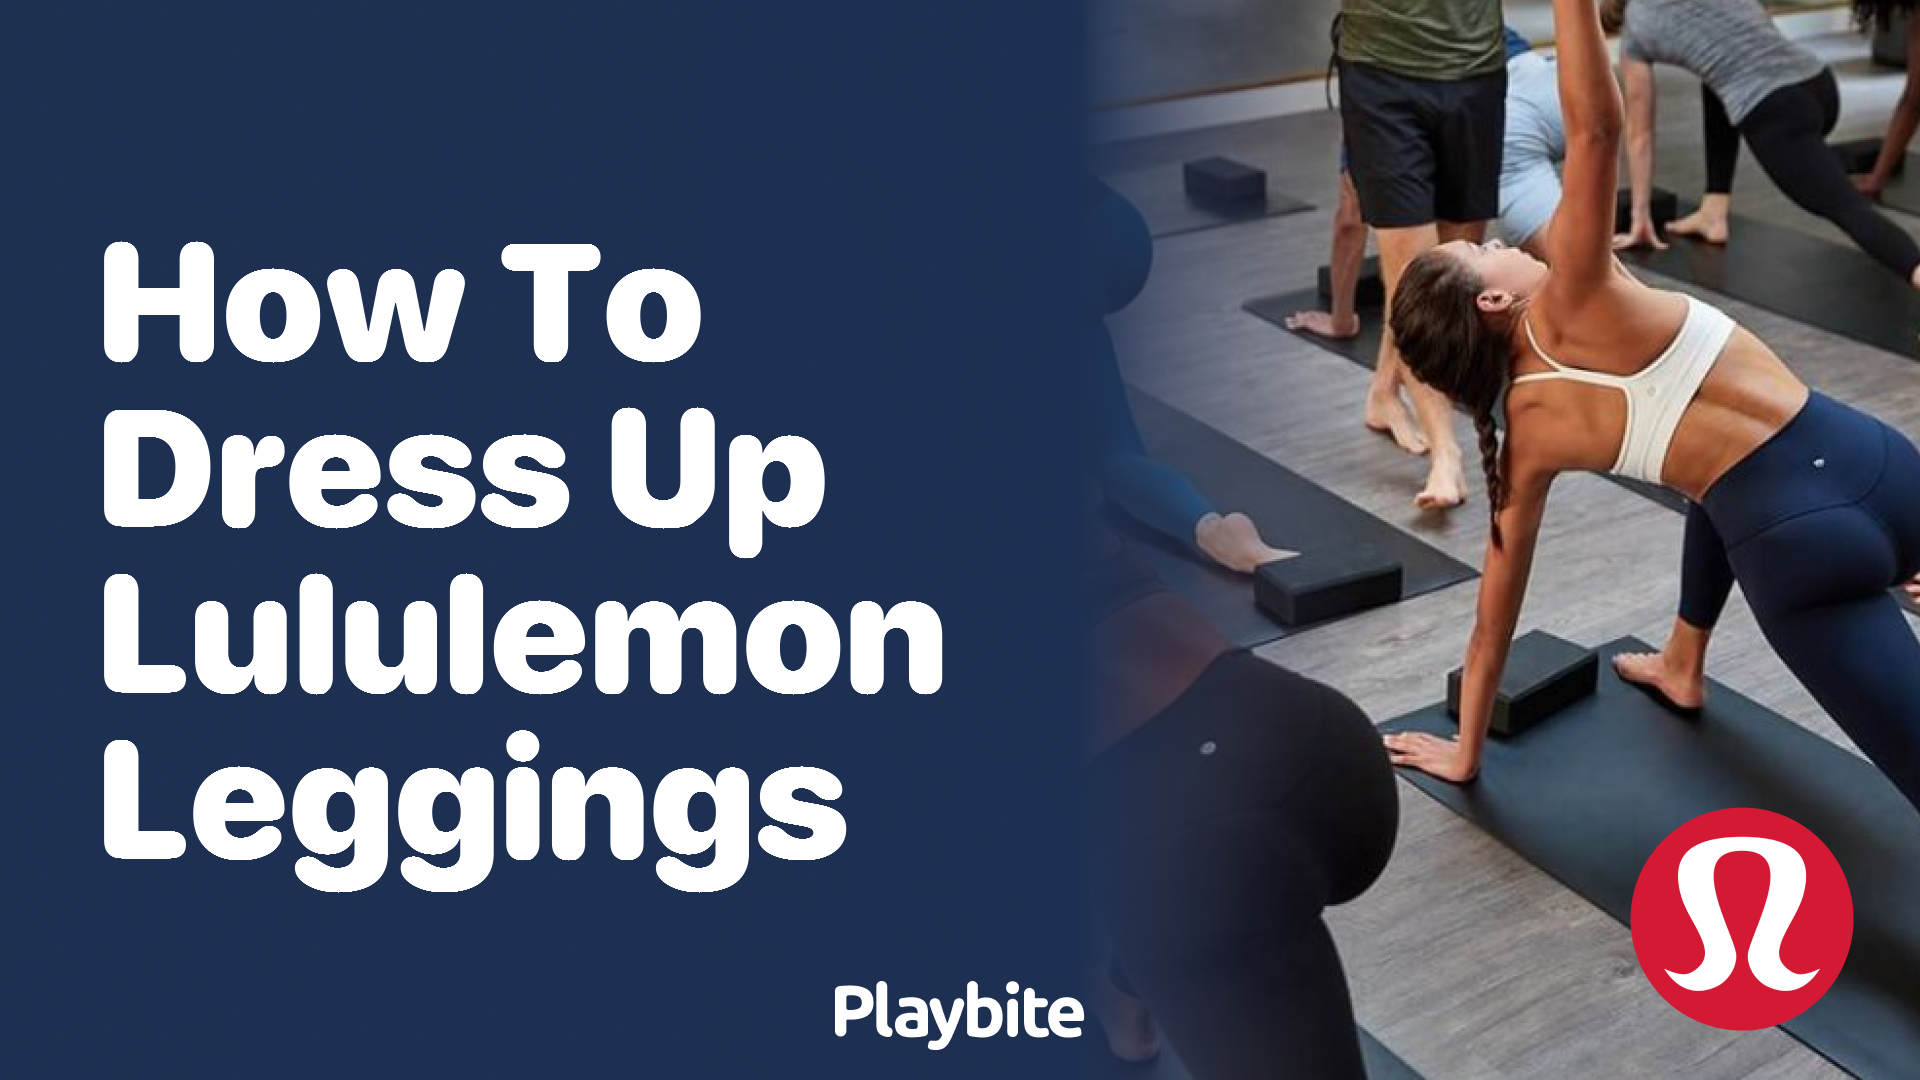 How to Dress Up Lululemon Leggings for Any Occasion - Playbite